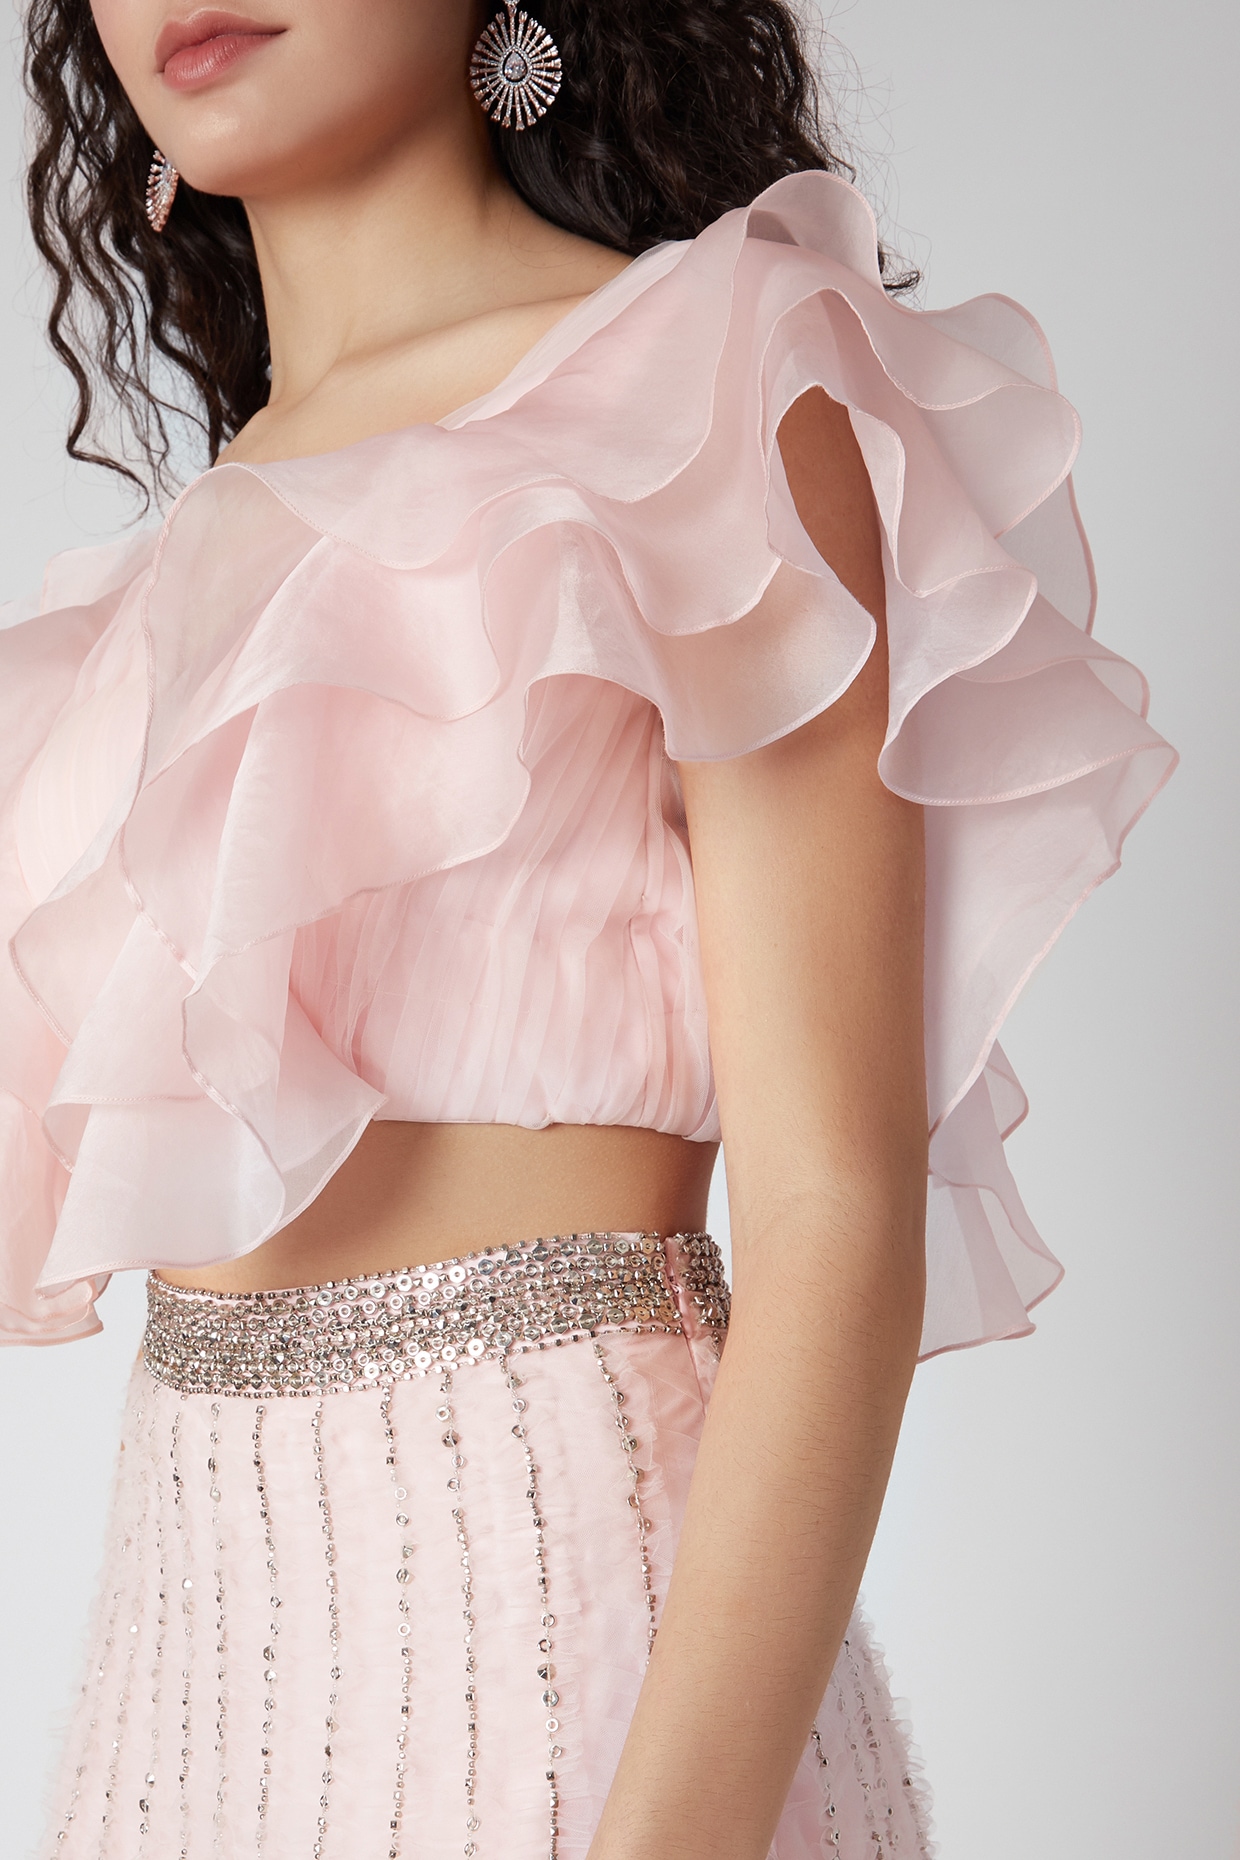 Stunning Ruffle Blouses Are The Talk Of The Town & Here's Why! |  WeddingBazaar